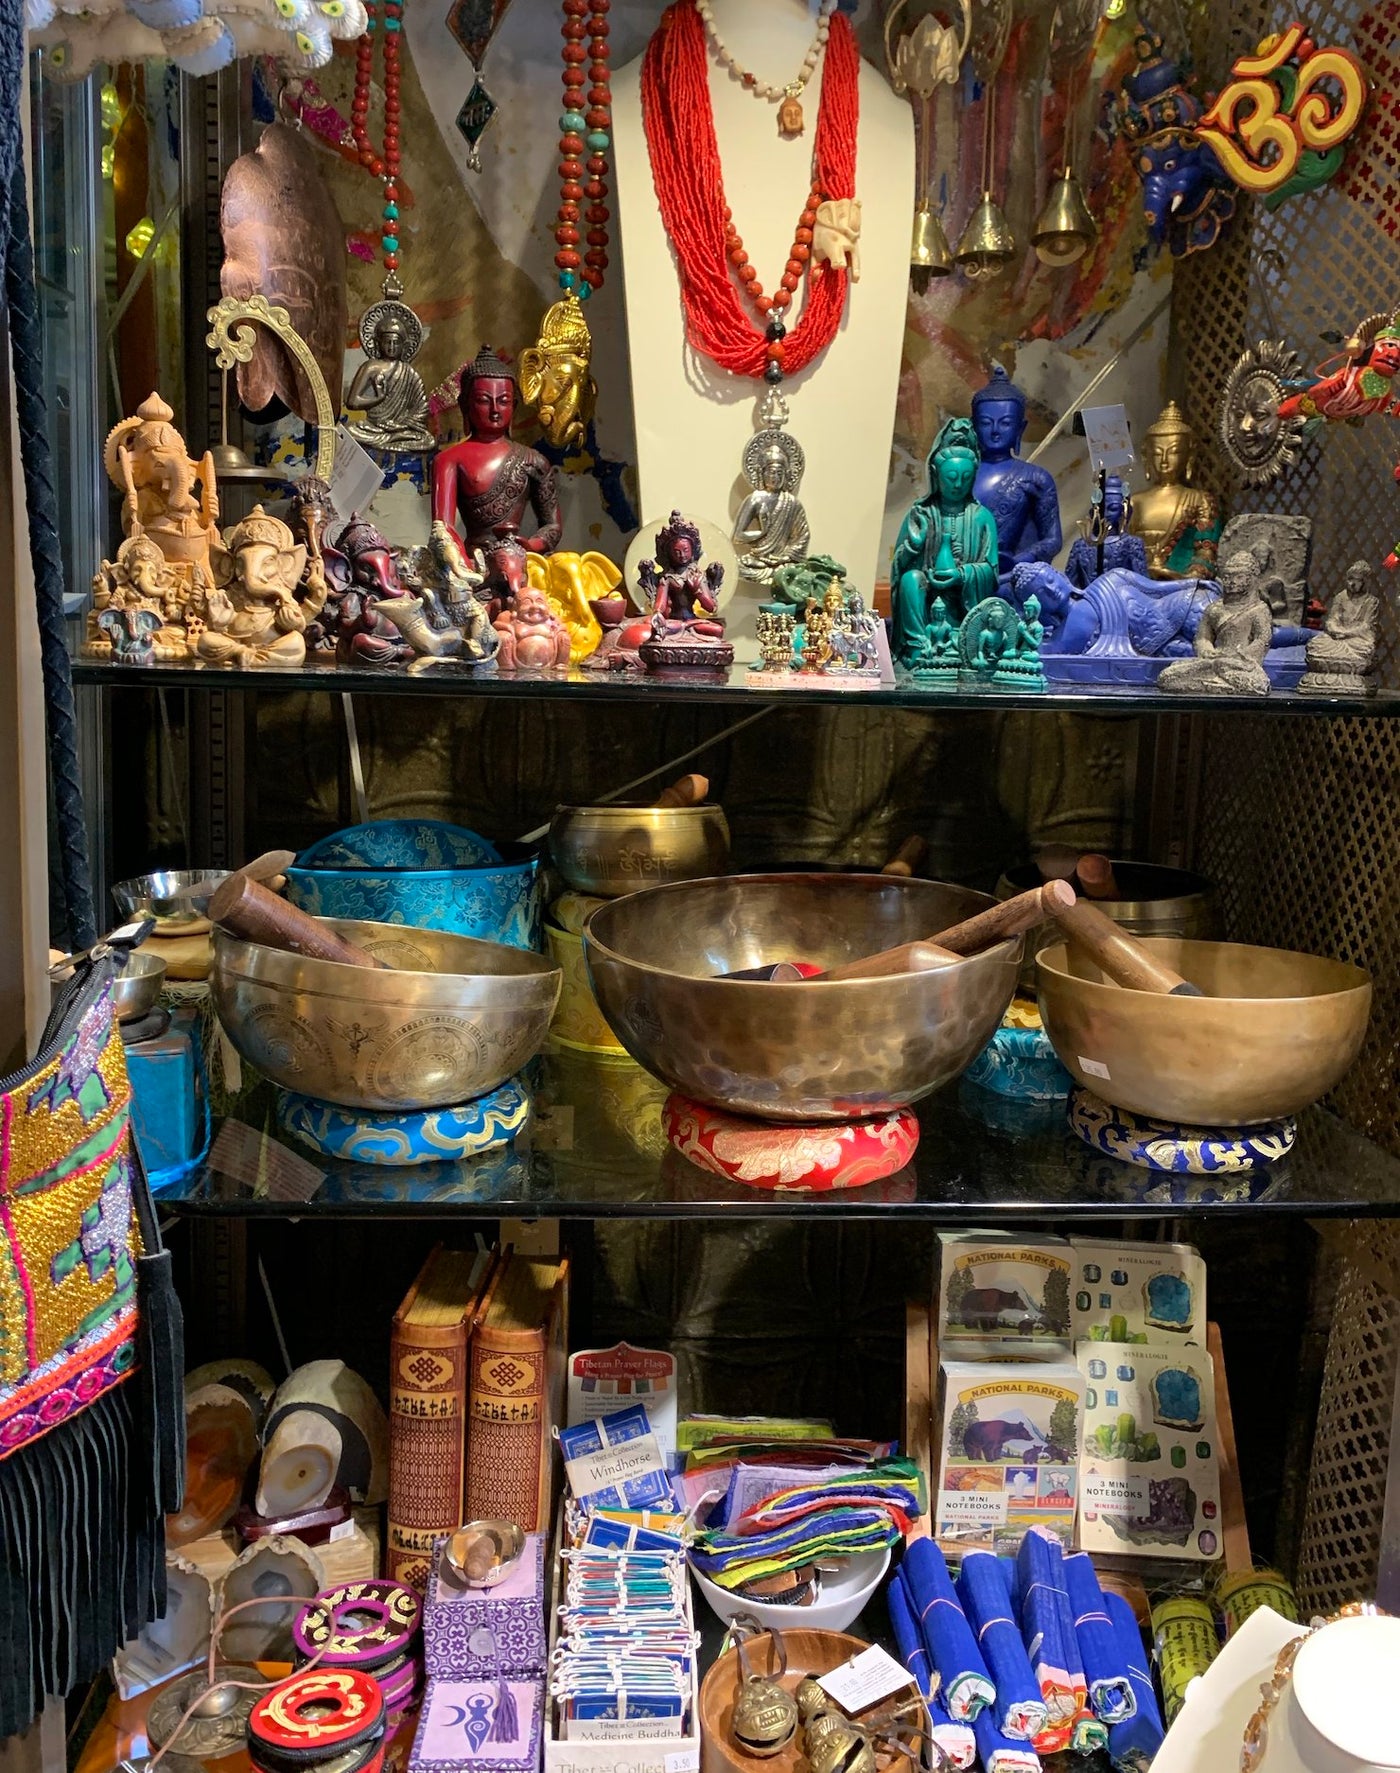 Singing bowls and Statues from Nepal and India